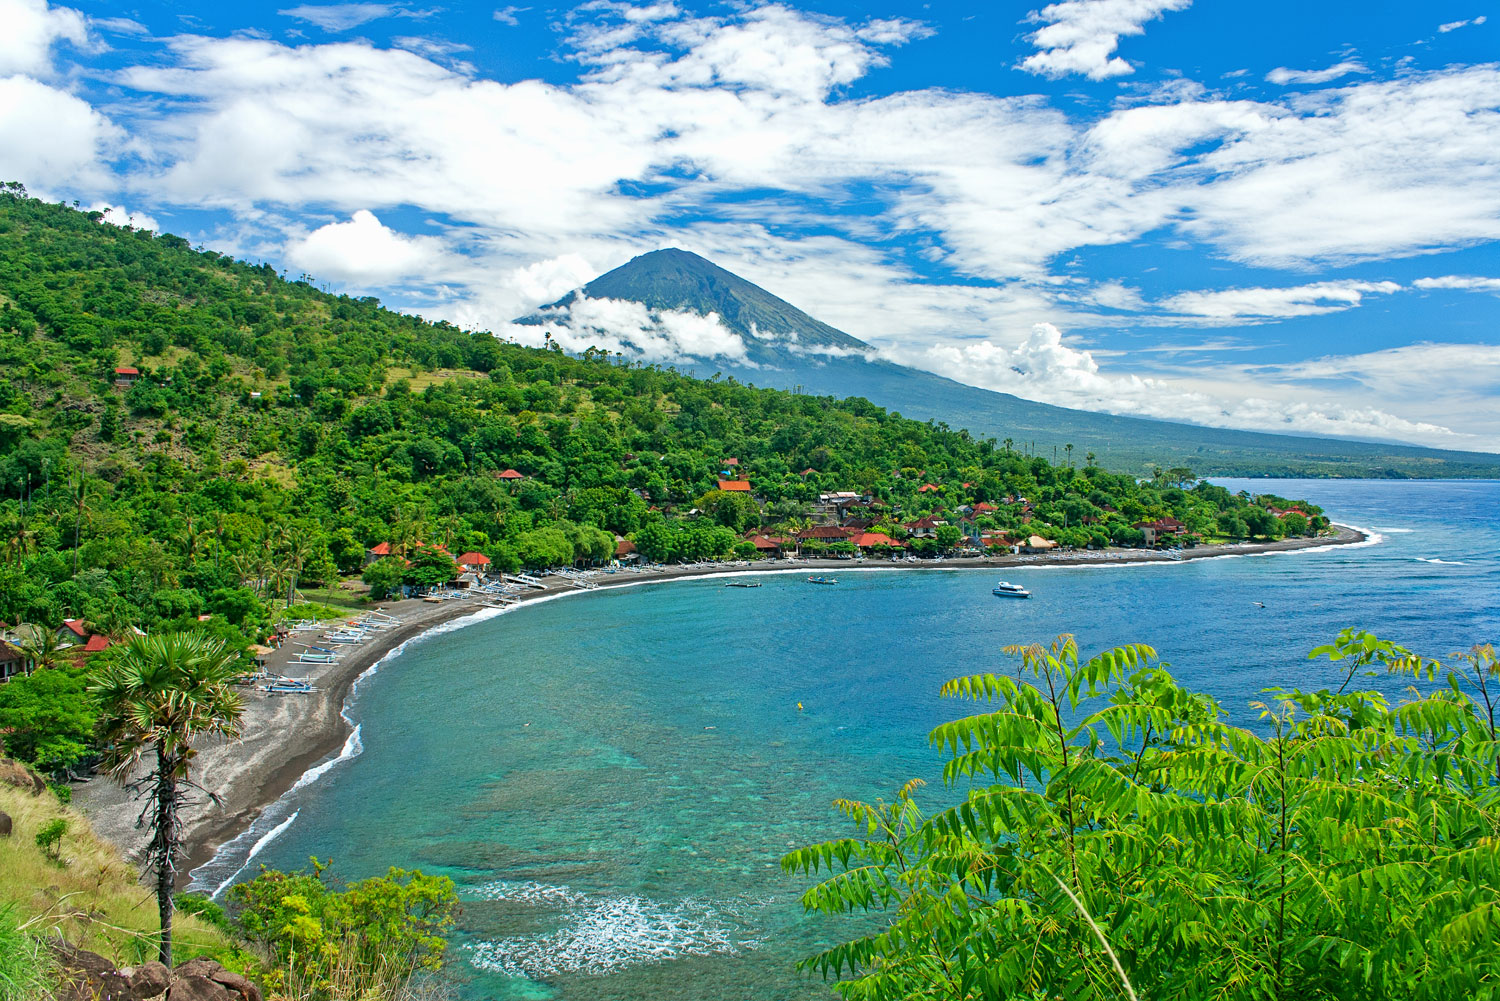 Amed in Bali's northeast, with Agung volcano in the background.